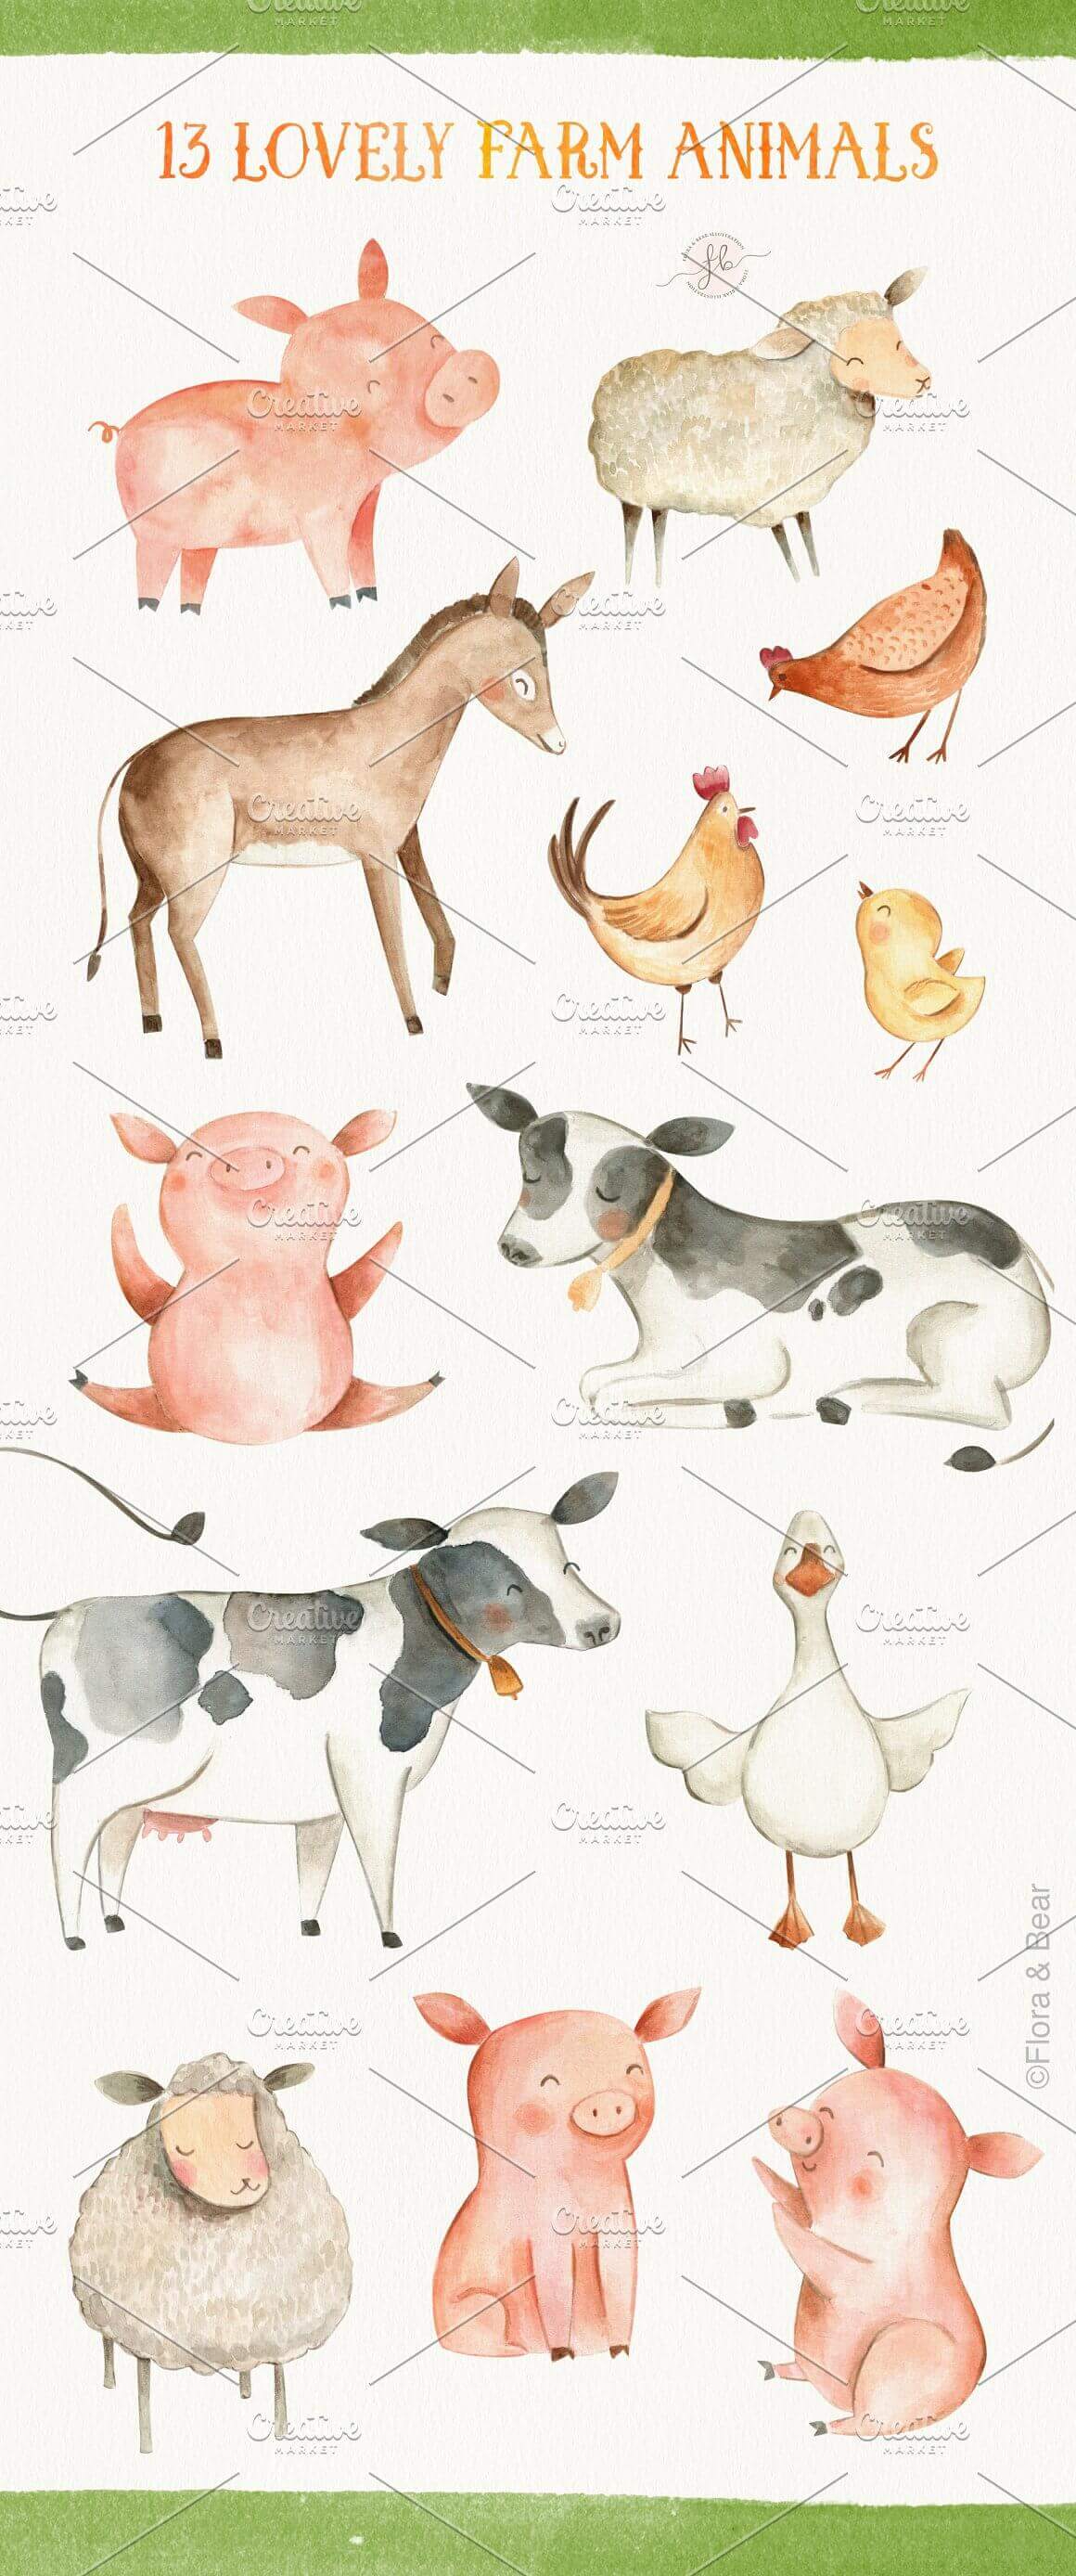 13 Lovely Farm Animals: Pigs, chickens, donkeys, sheep, geese and others.